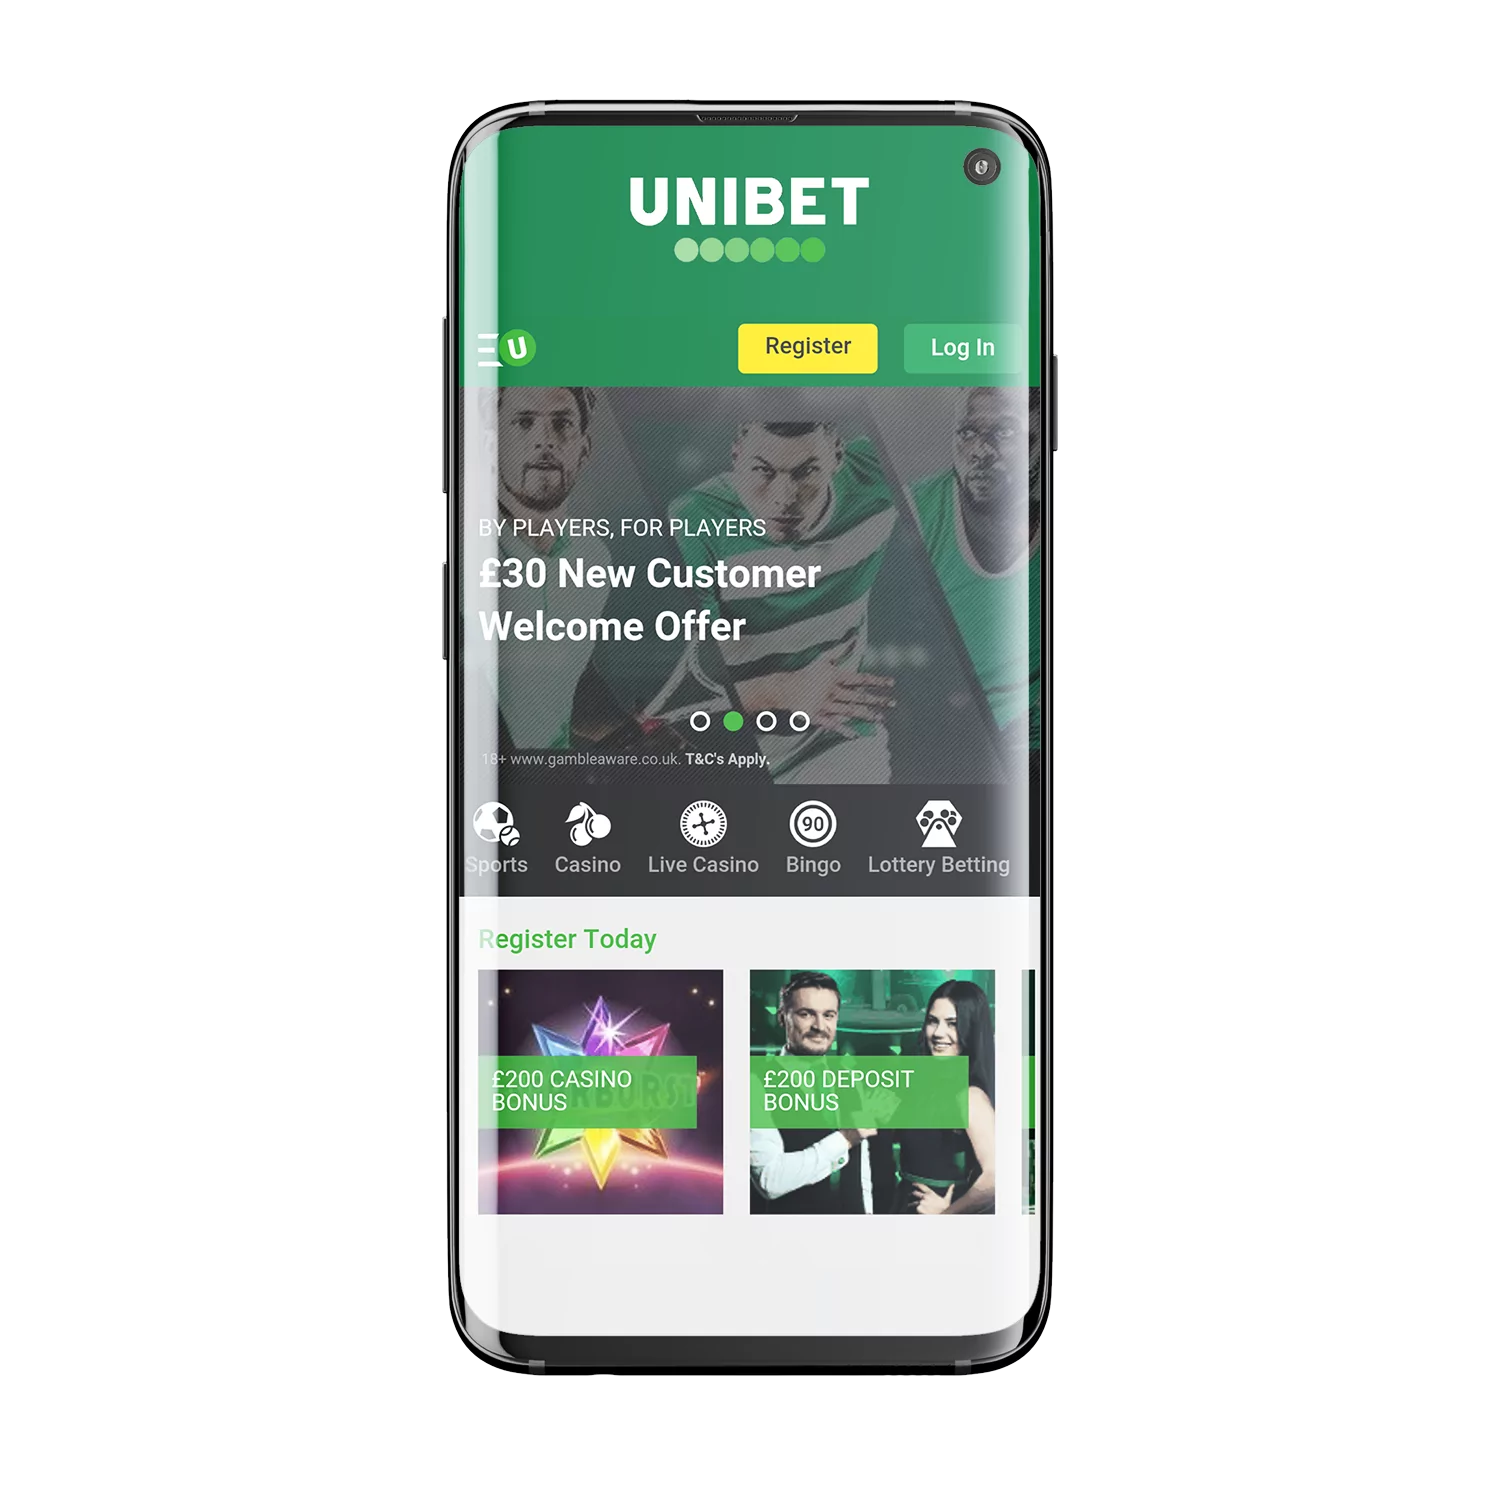 Learn how to use the Unibet mobile app for betting.